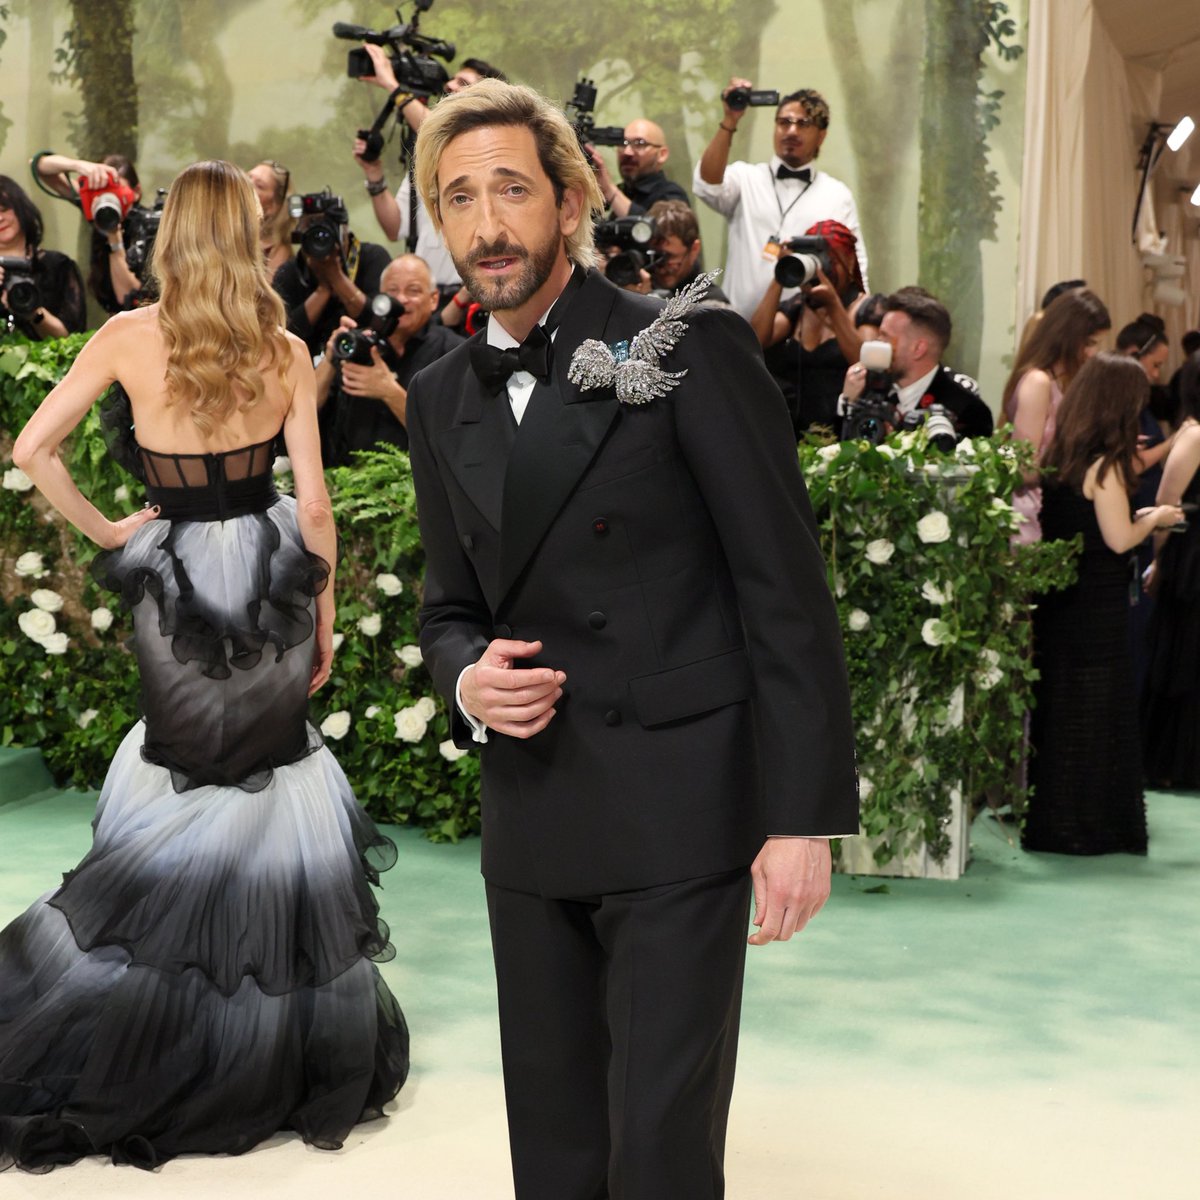 #AdrienBrody has arrived at the #MetGala